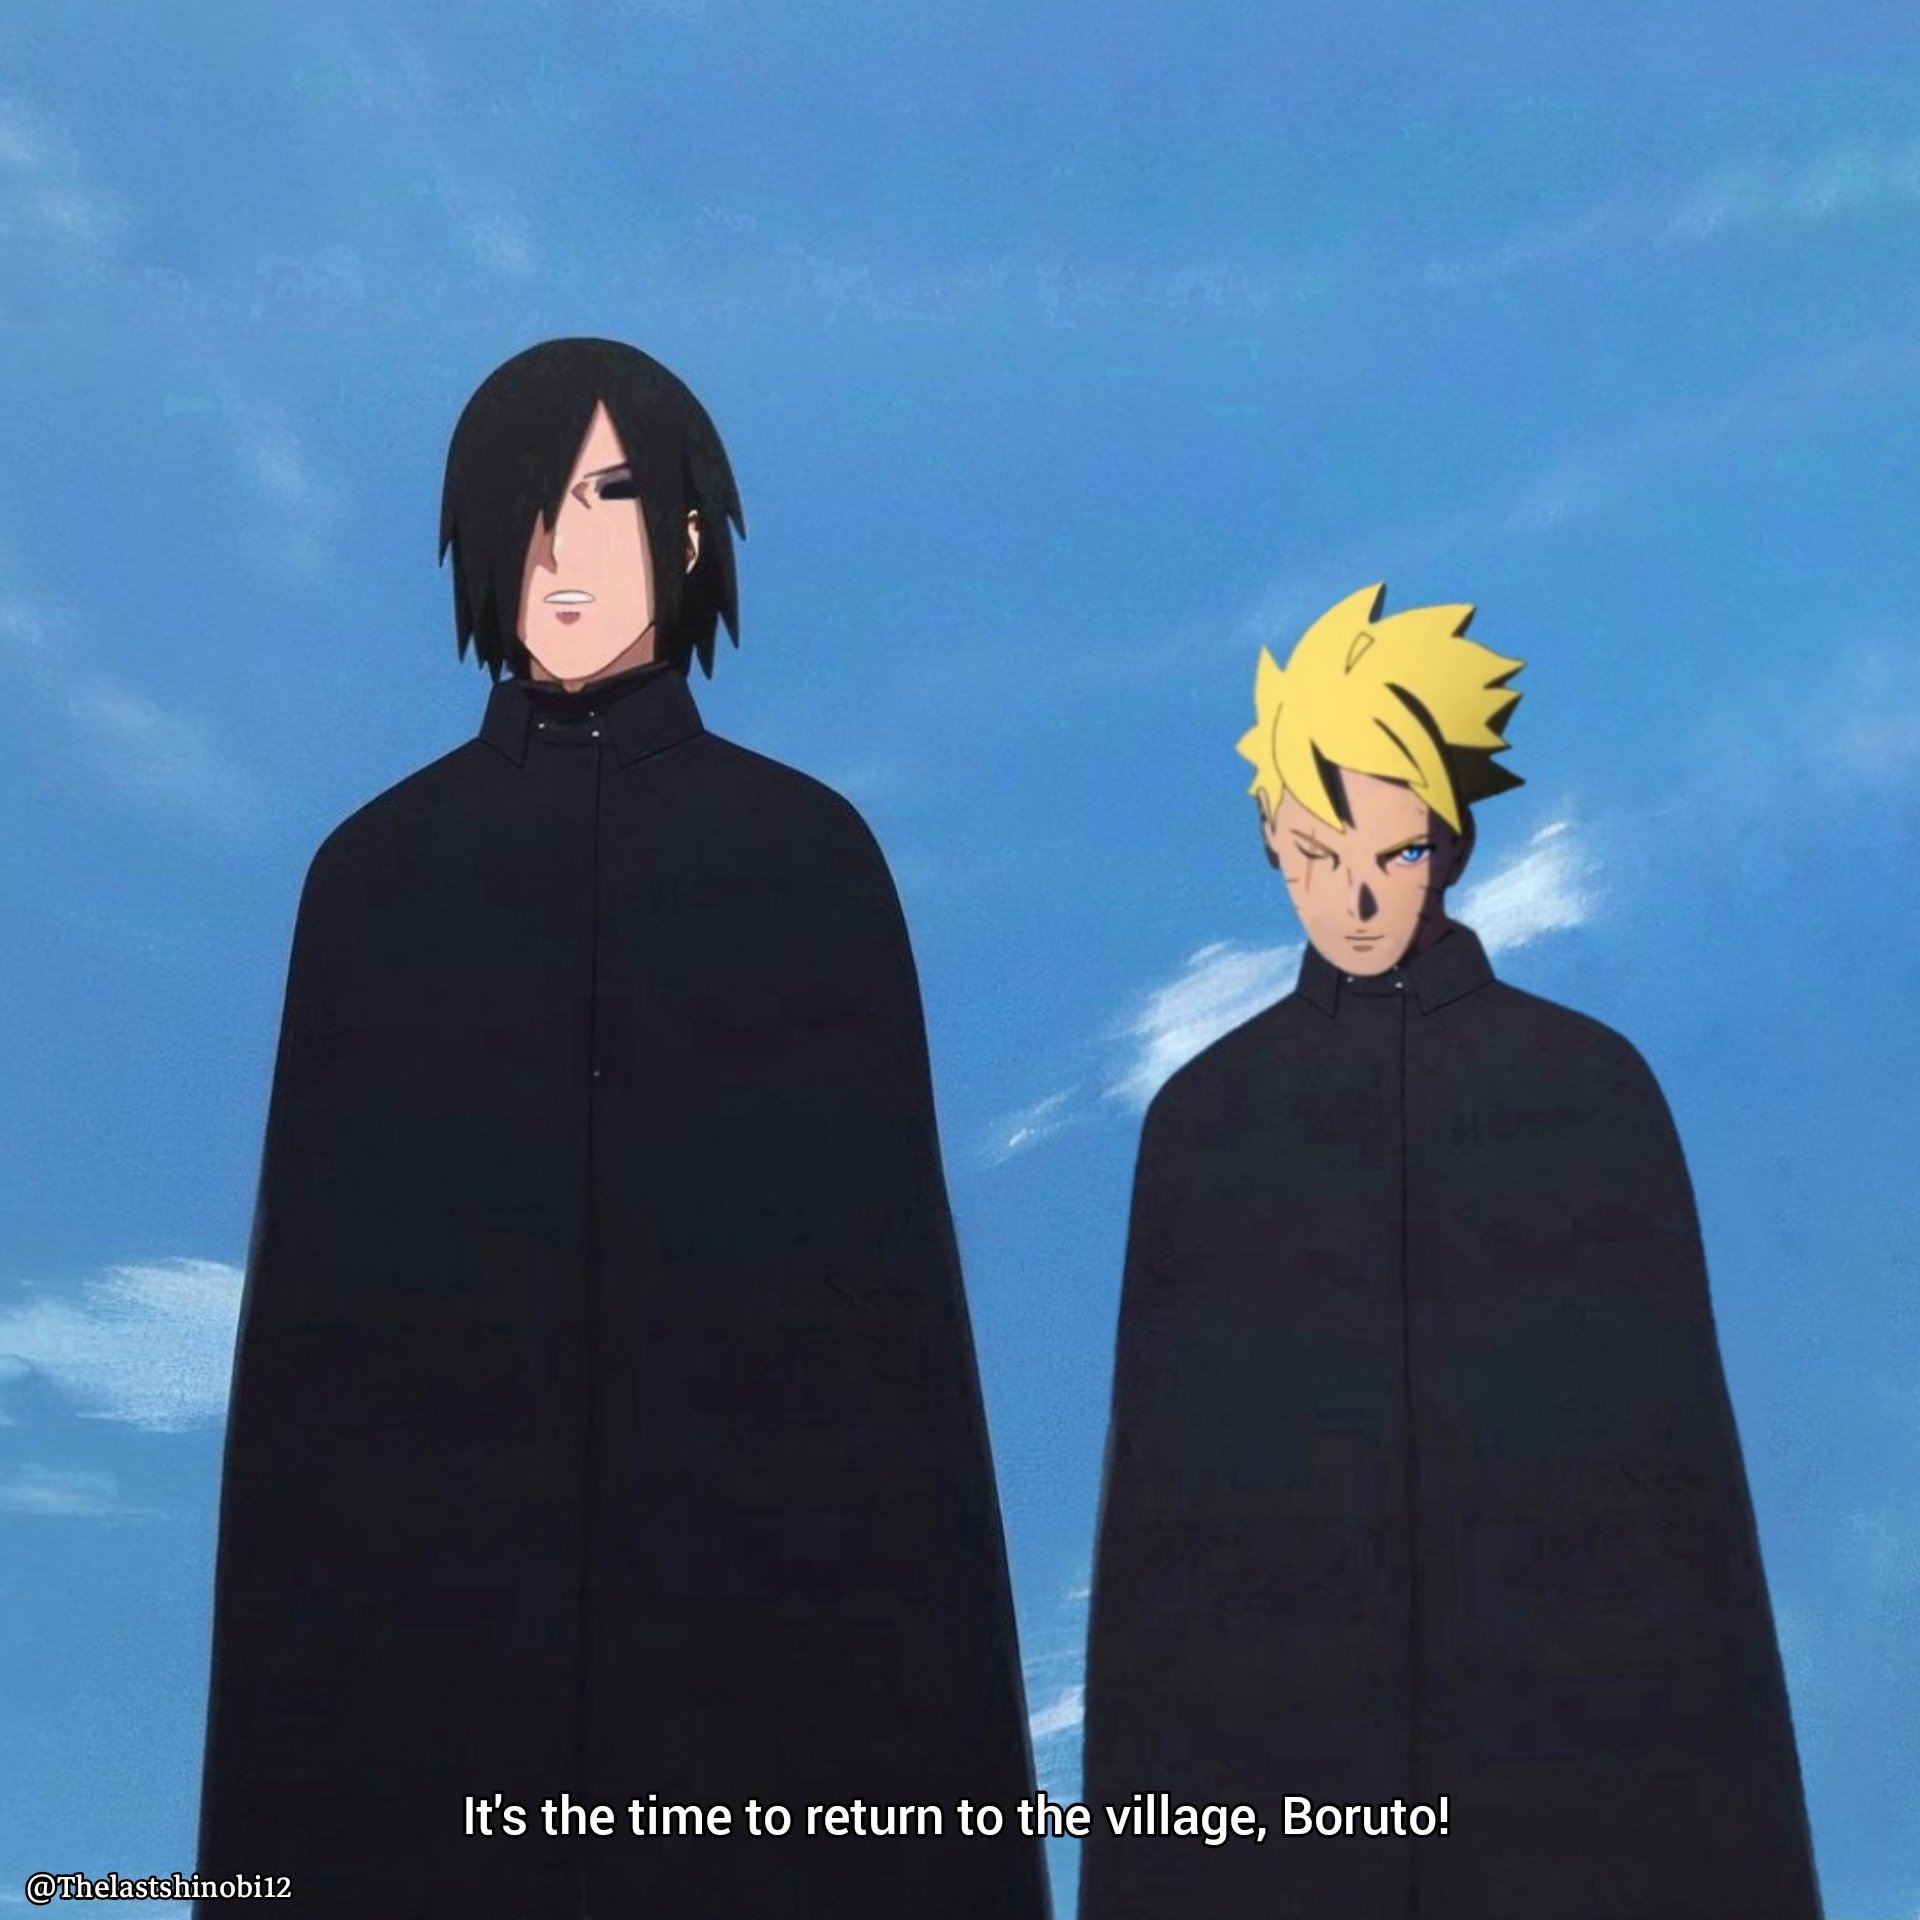 The Last Shinobi on X: The first day after timeskip. [it's the